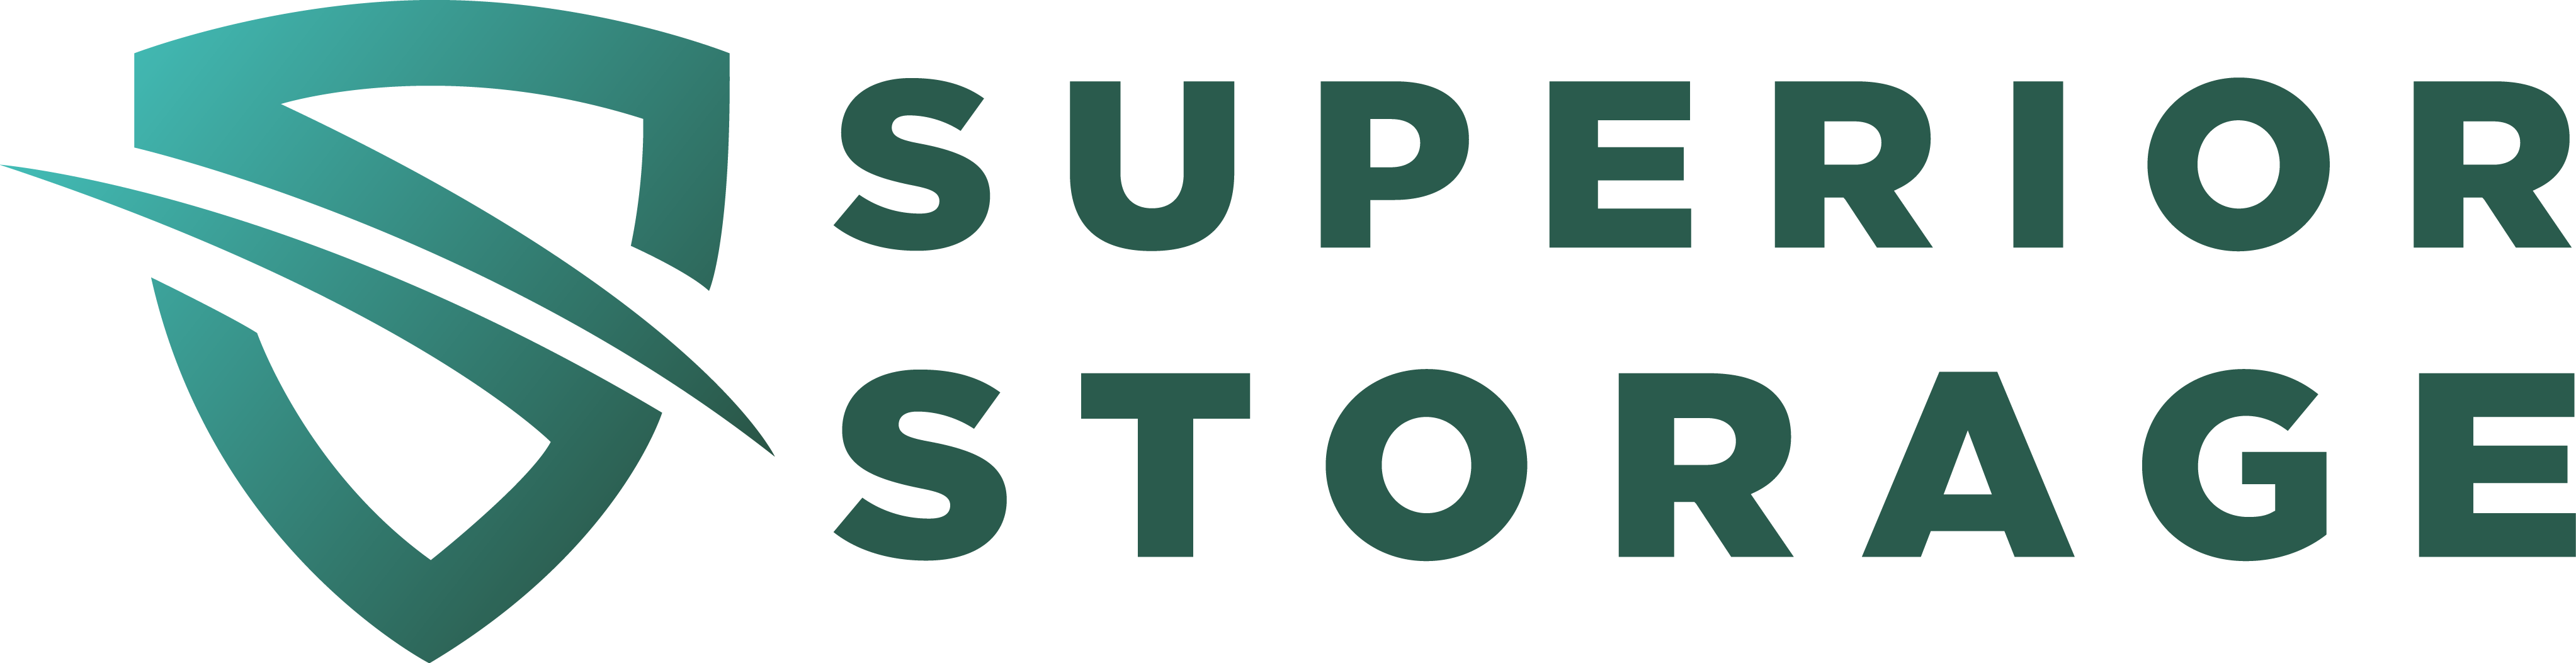 Graphic of the Superior Storage logo, depicting a distinctive design with stylized lettering, symbolizing the brand's identity and commitment to quality storage solutions.